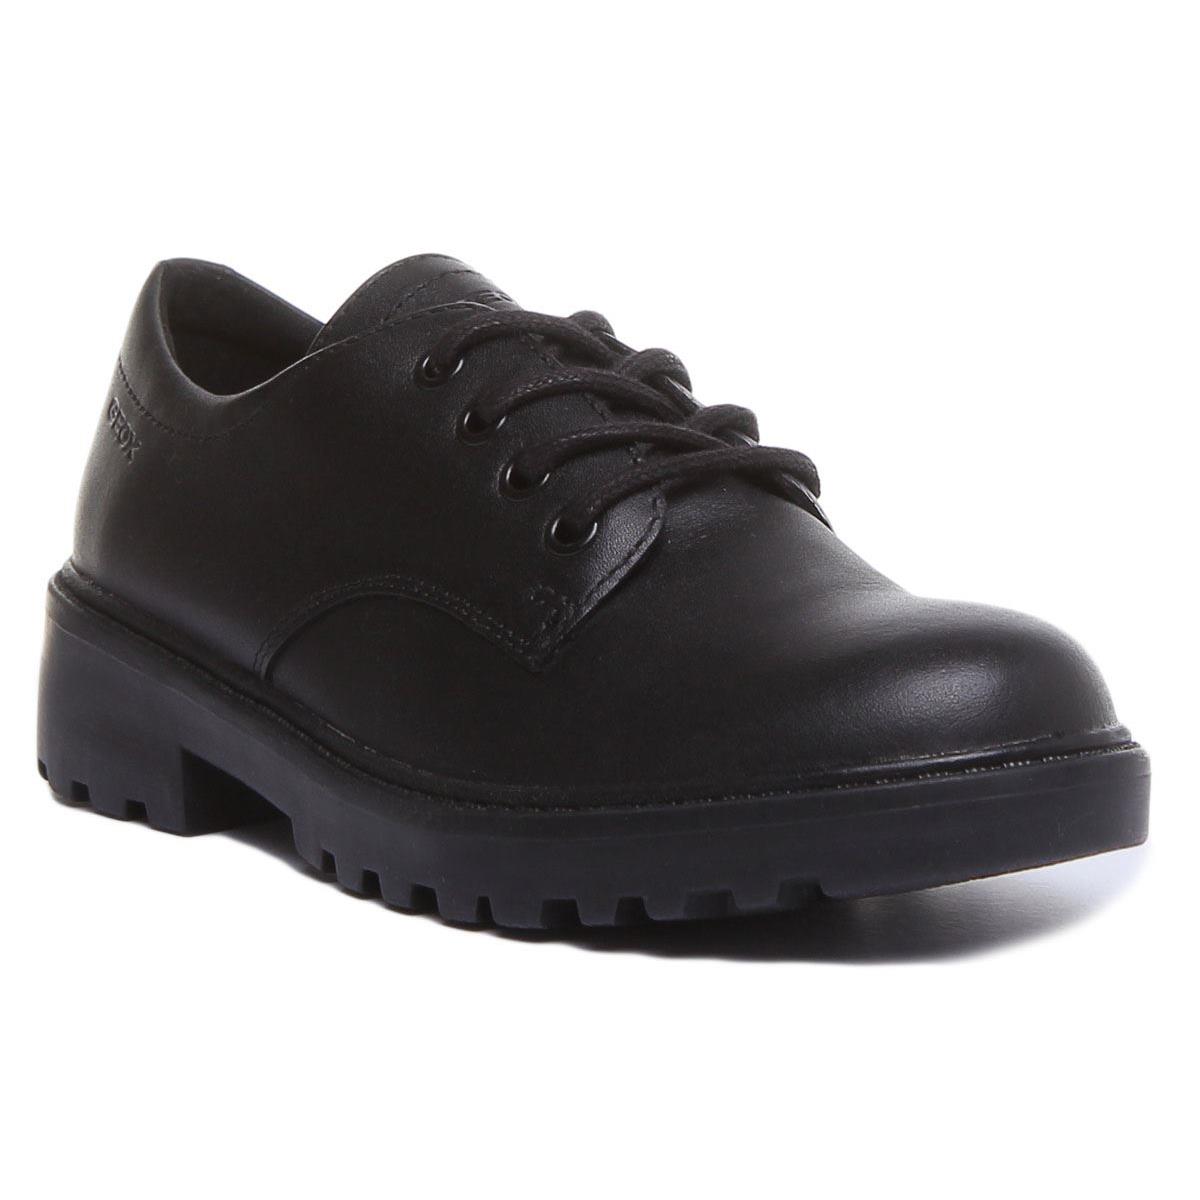 Geox J Casey Girls Lace Up Leather School Shoes In Black Size US 12 - 4 Black